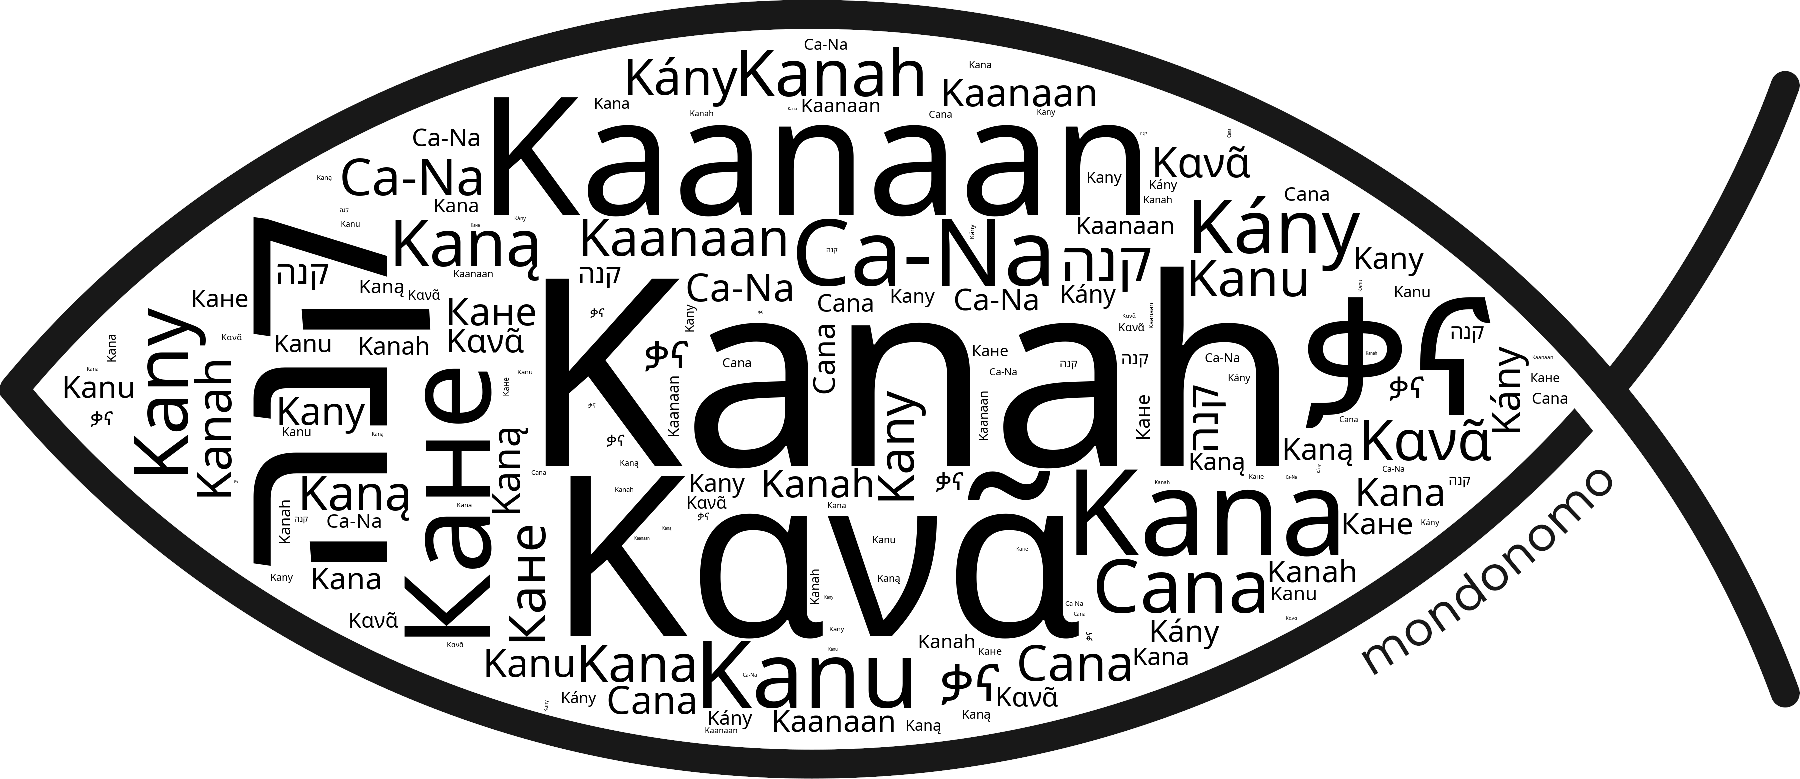 Name Kanah in the world's Bibles